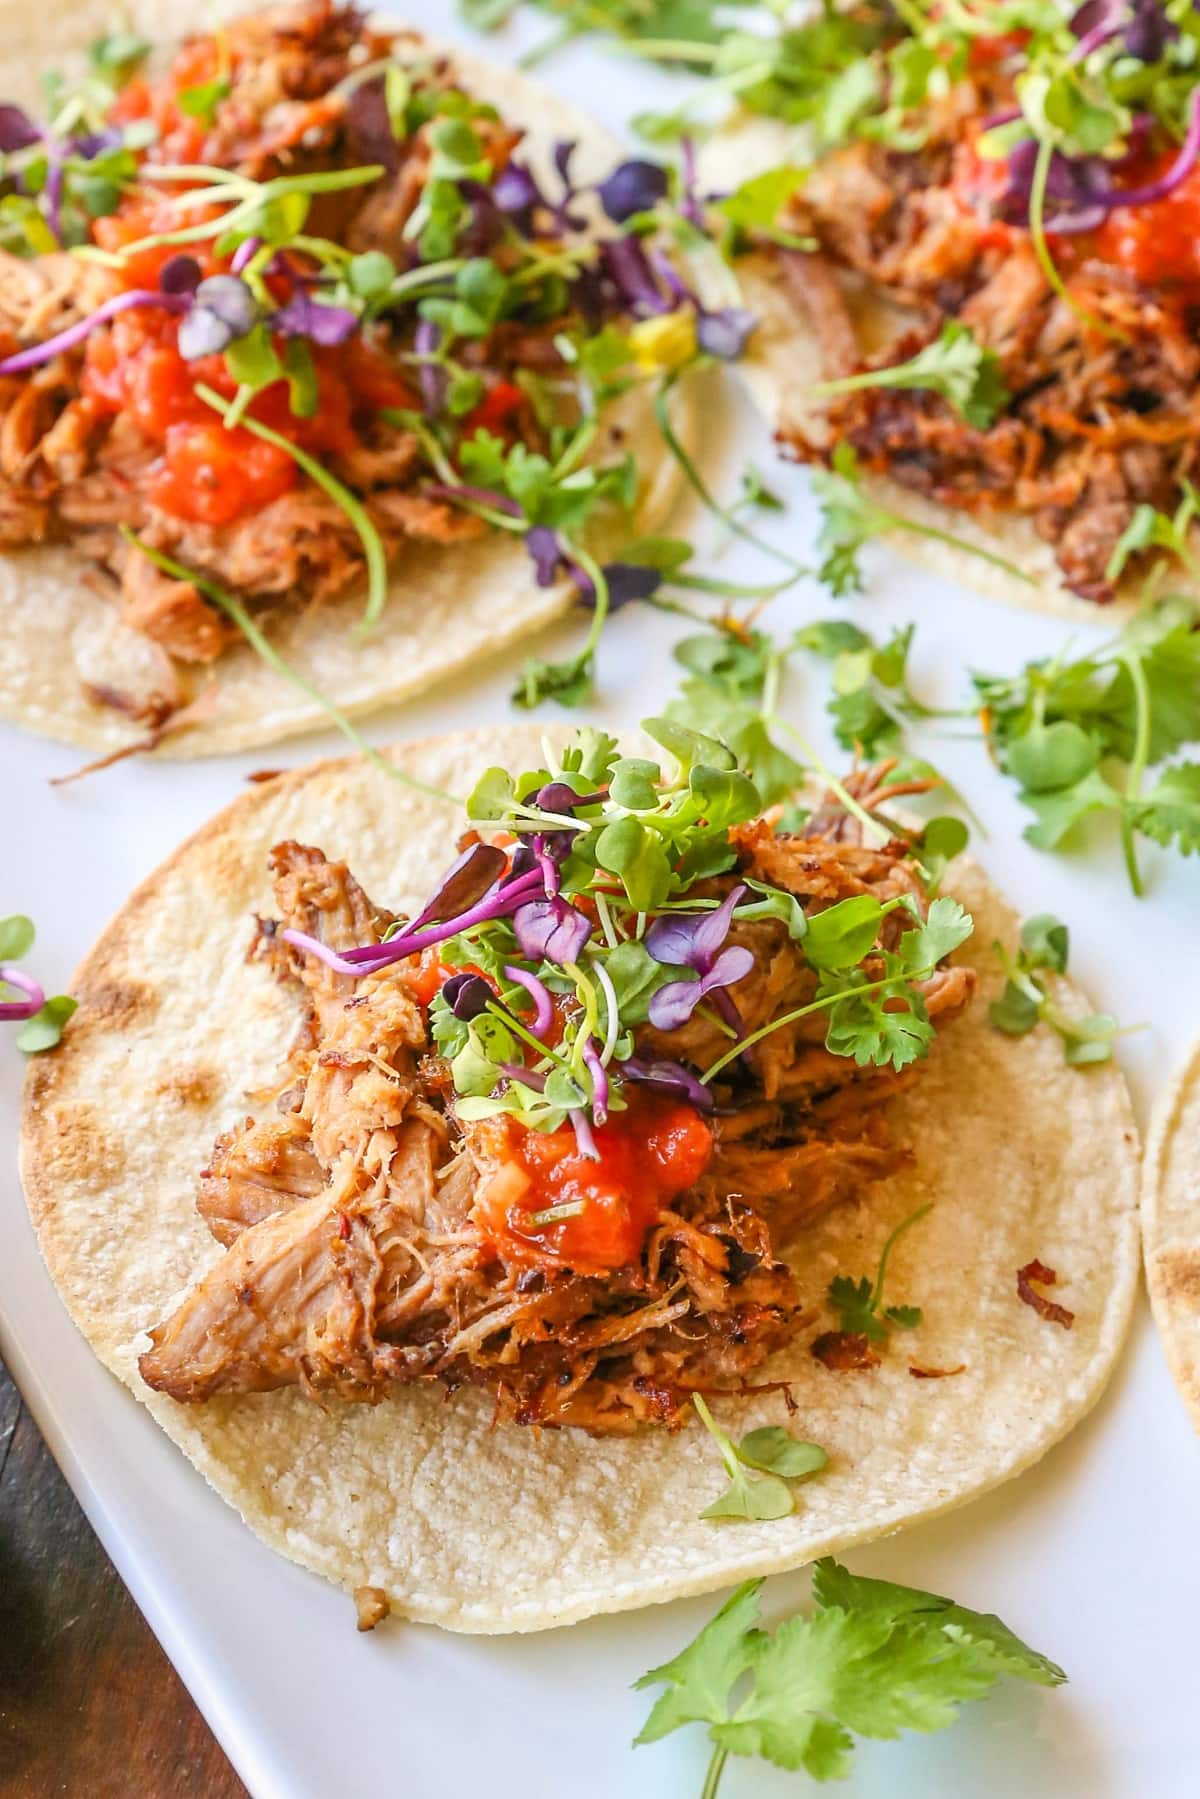 Crock Pot Barbacoa Beef using only 4 ingredients and about 10 minutes of prep